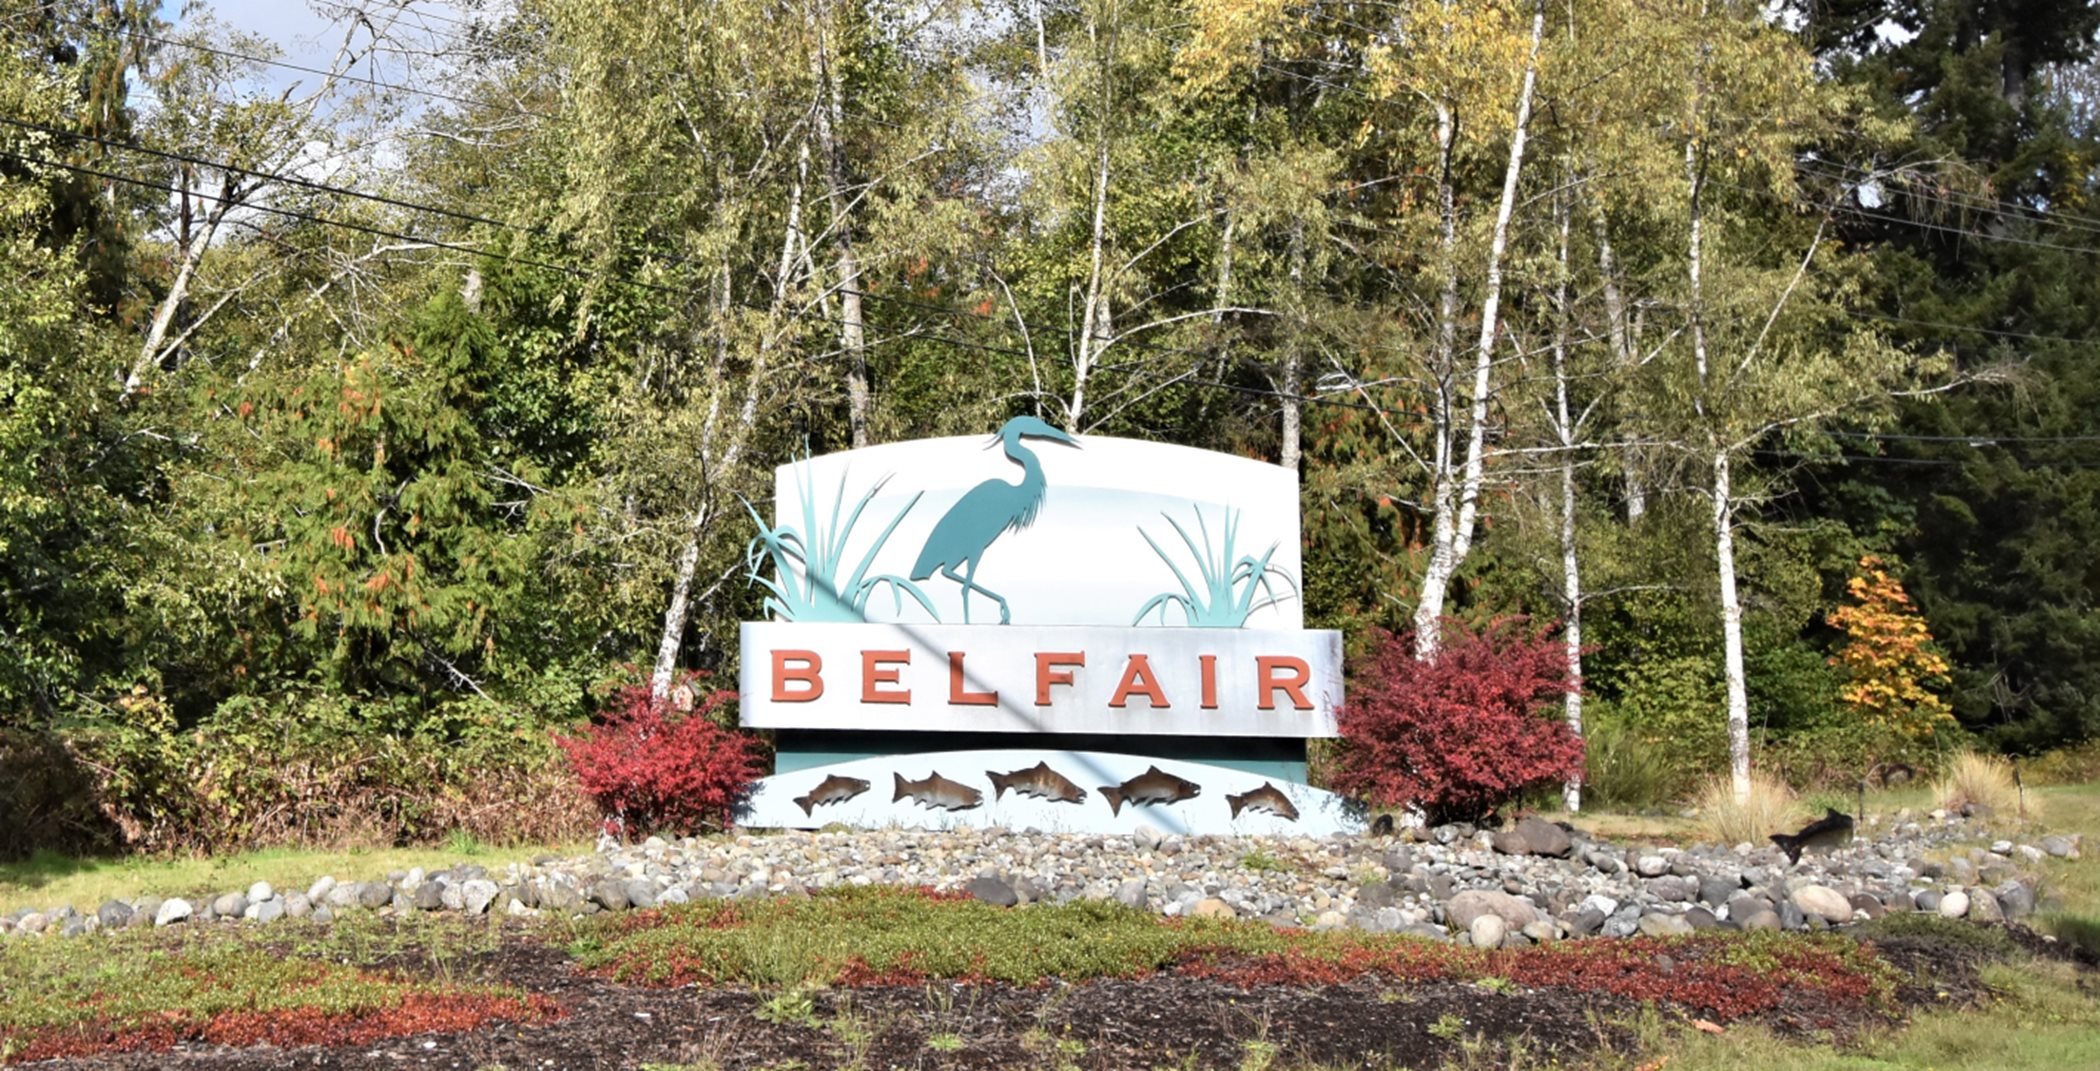 Belfair welcome sign, which features the green silhouette of a crane 